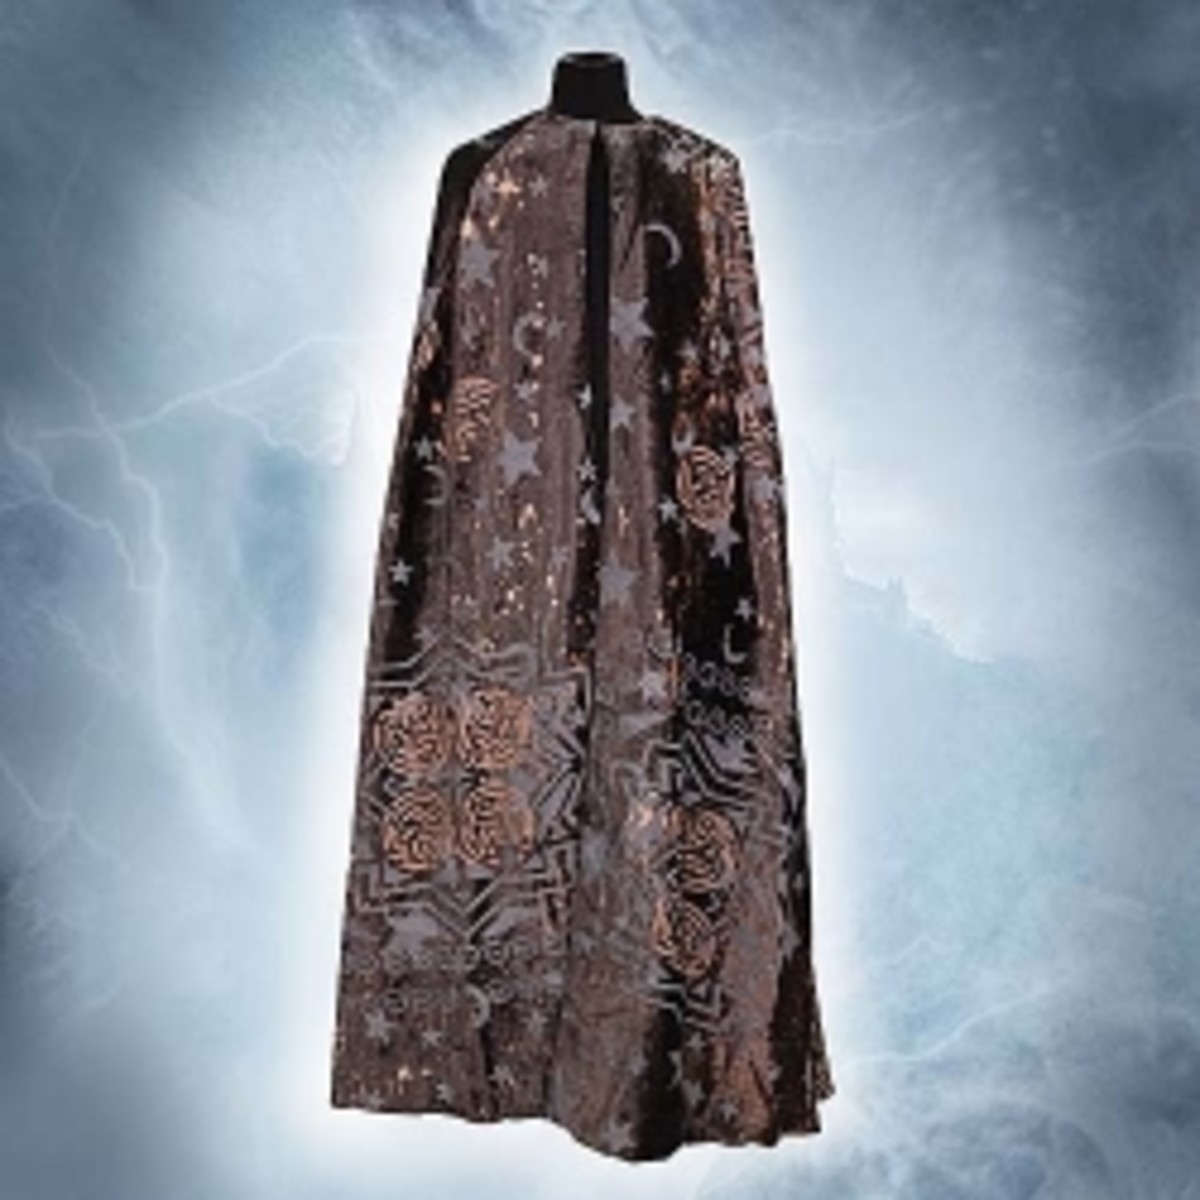 Harry Potter's Cloak of Invisibility